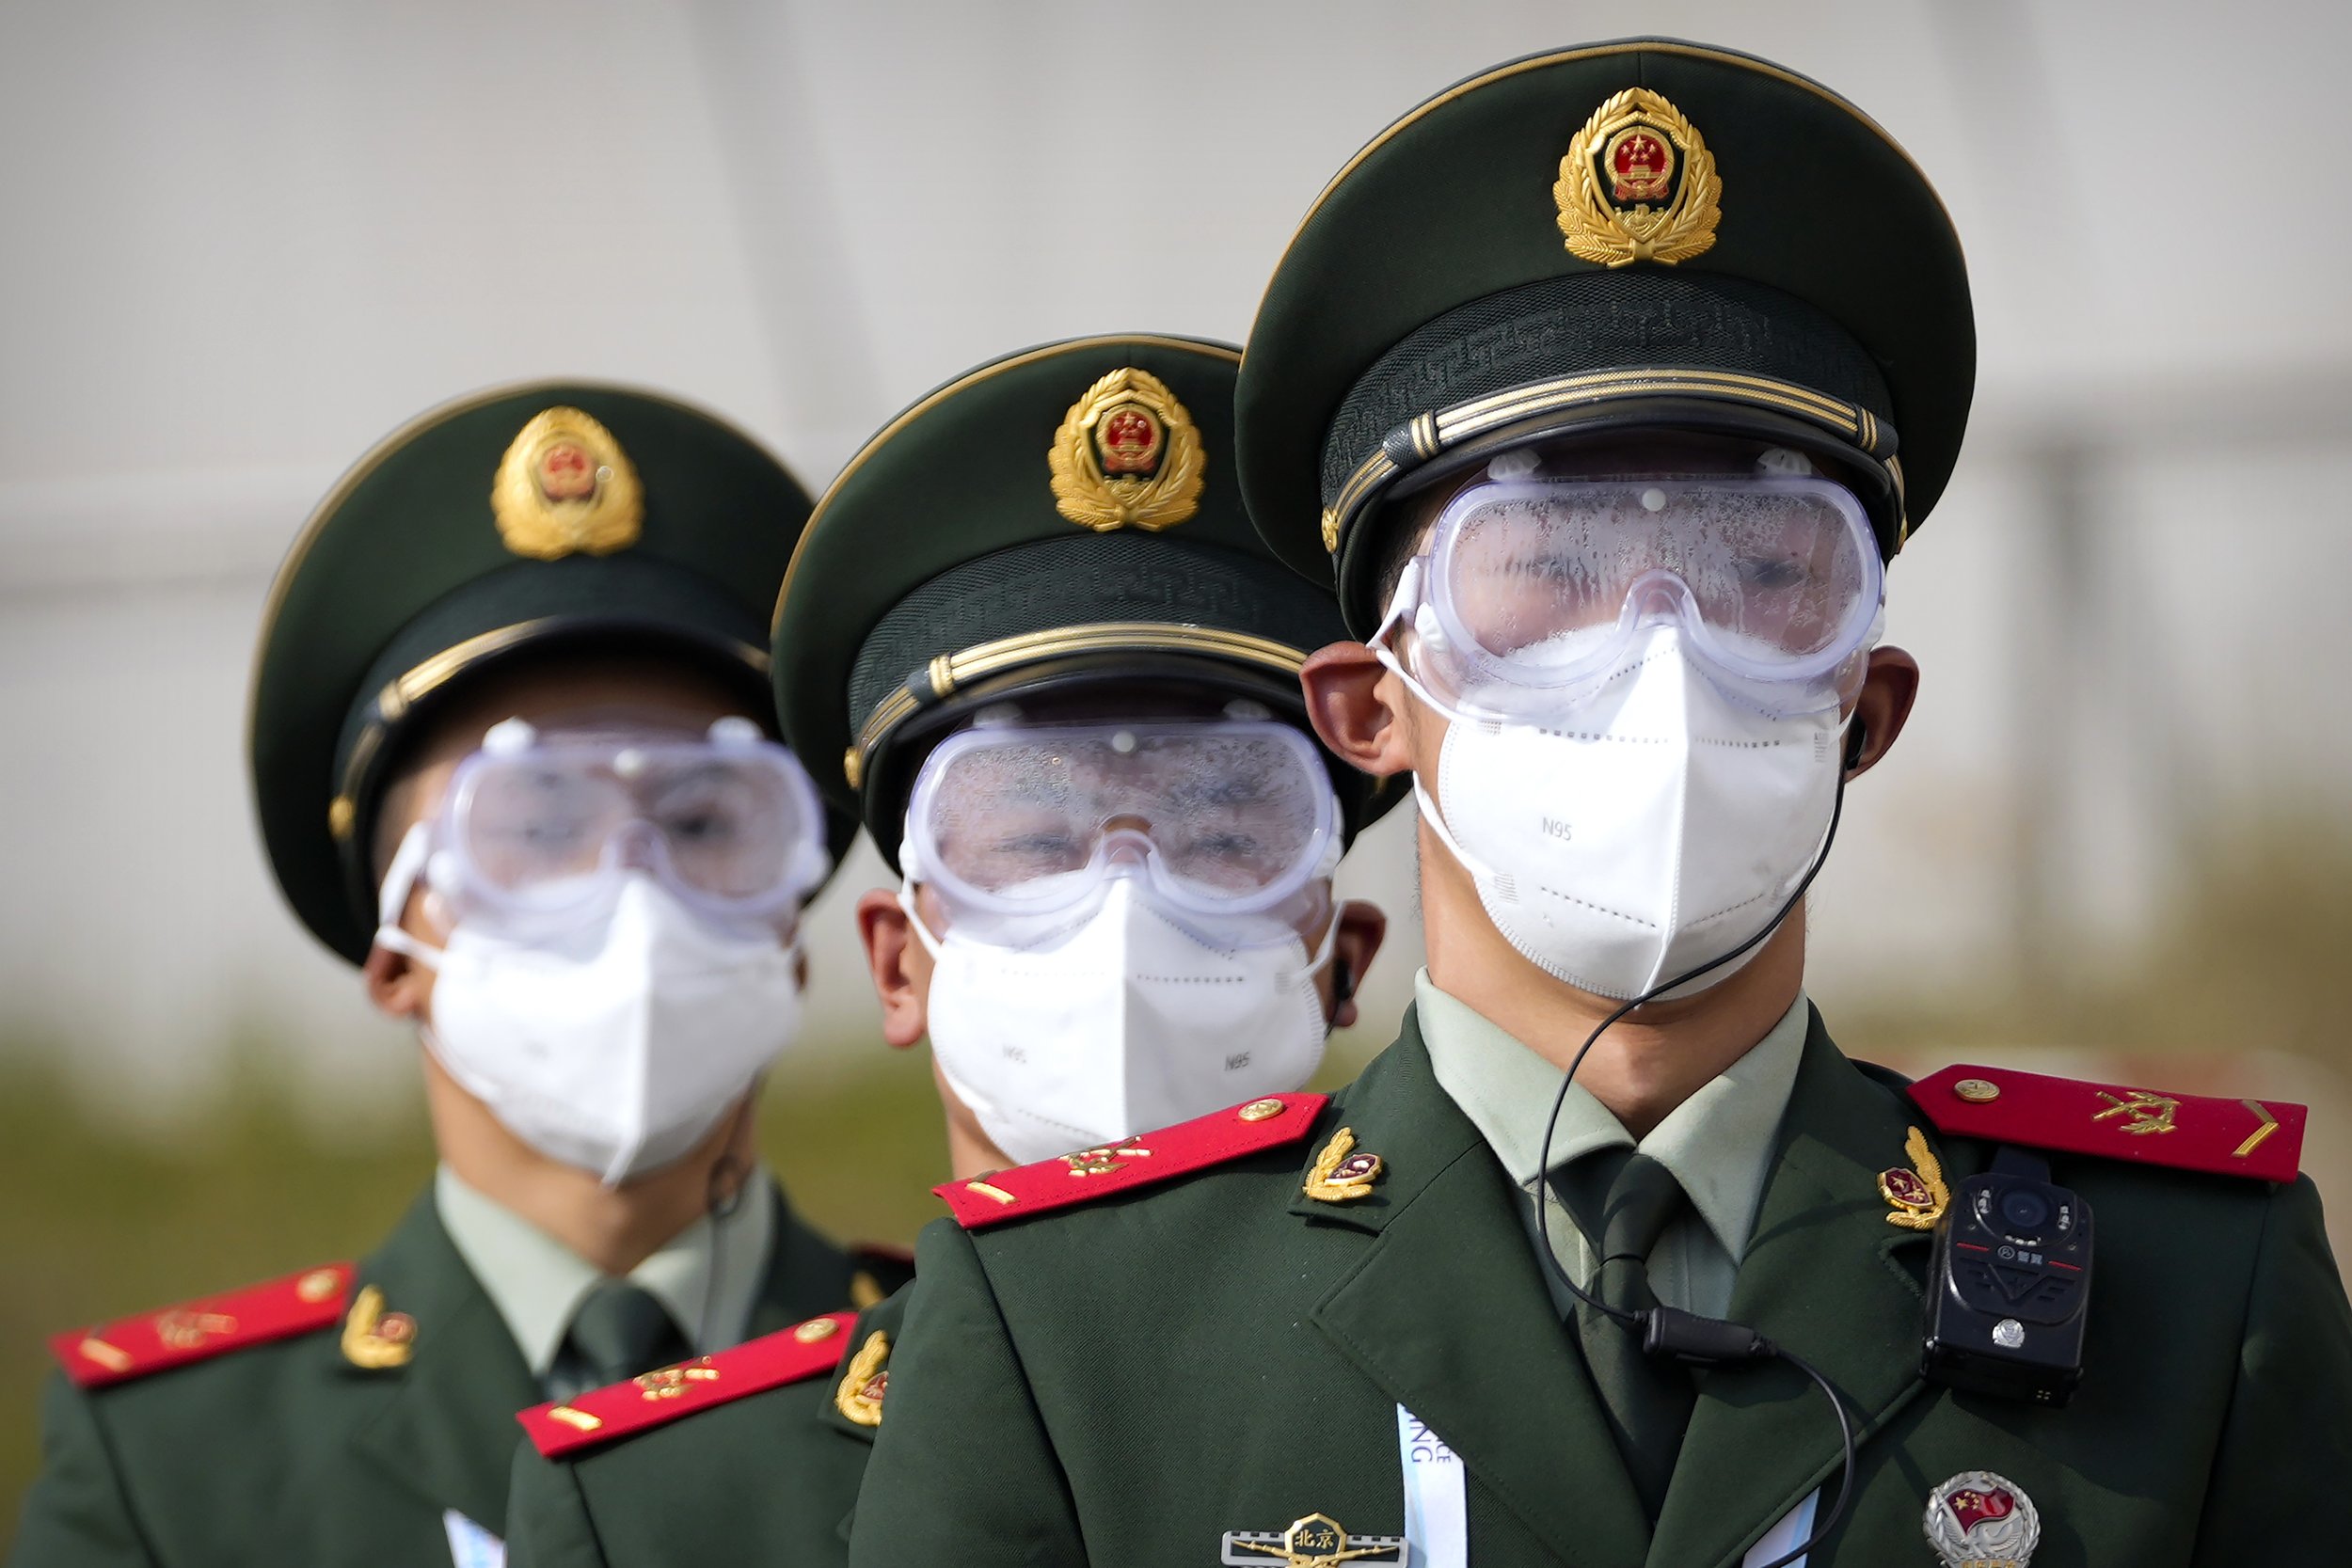  Chinese paramilitary police wearing goggles and face masks march in formation at the Yanqing National Sliding Center during an IBSF sanctioned race, a test event for the 2022 Winter Olympics, in Beijing, Monday, Oct. 25, 2021. A northwestern Chinese